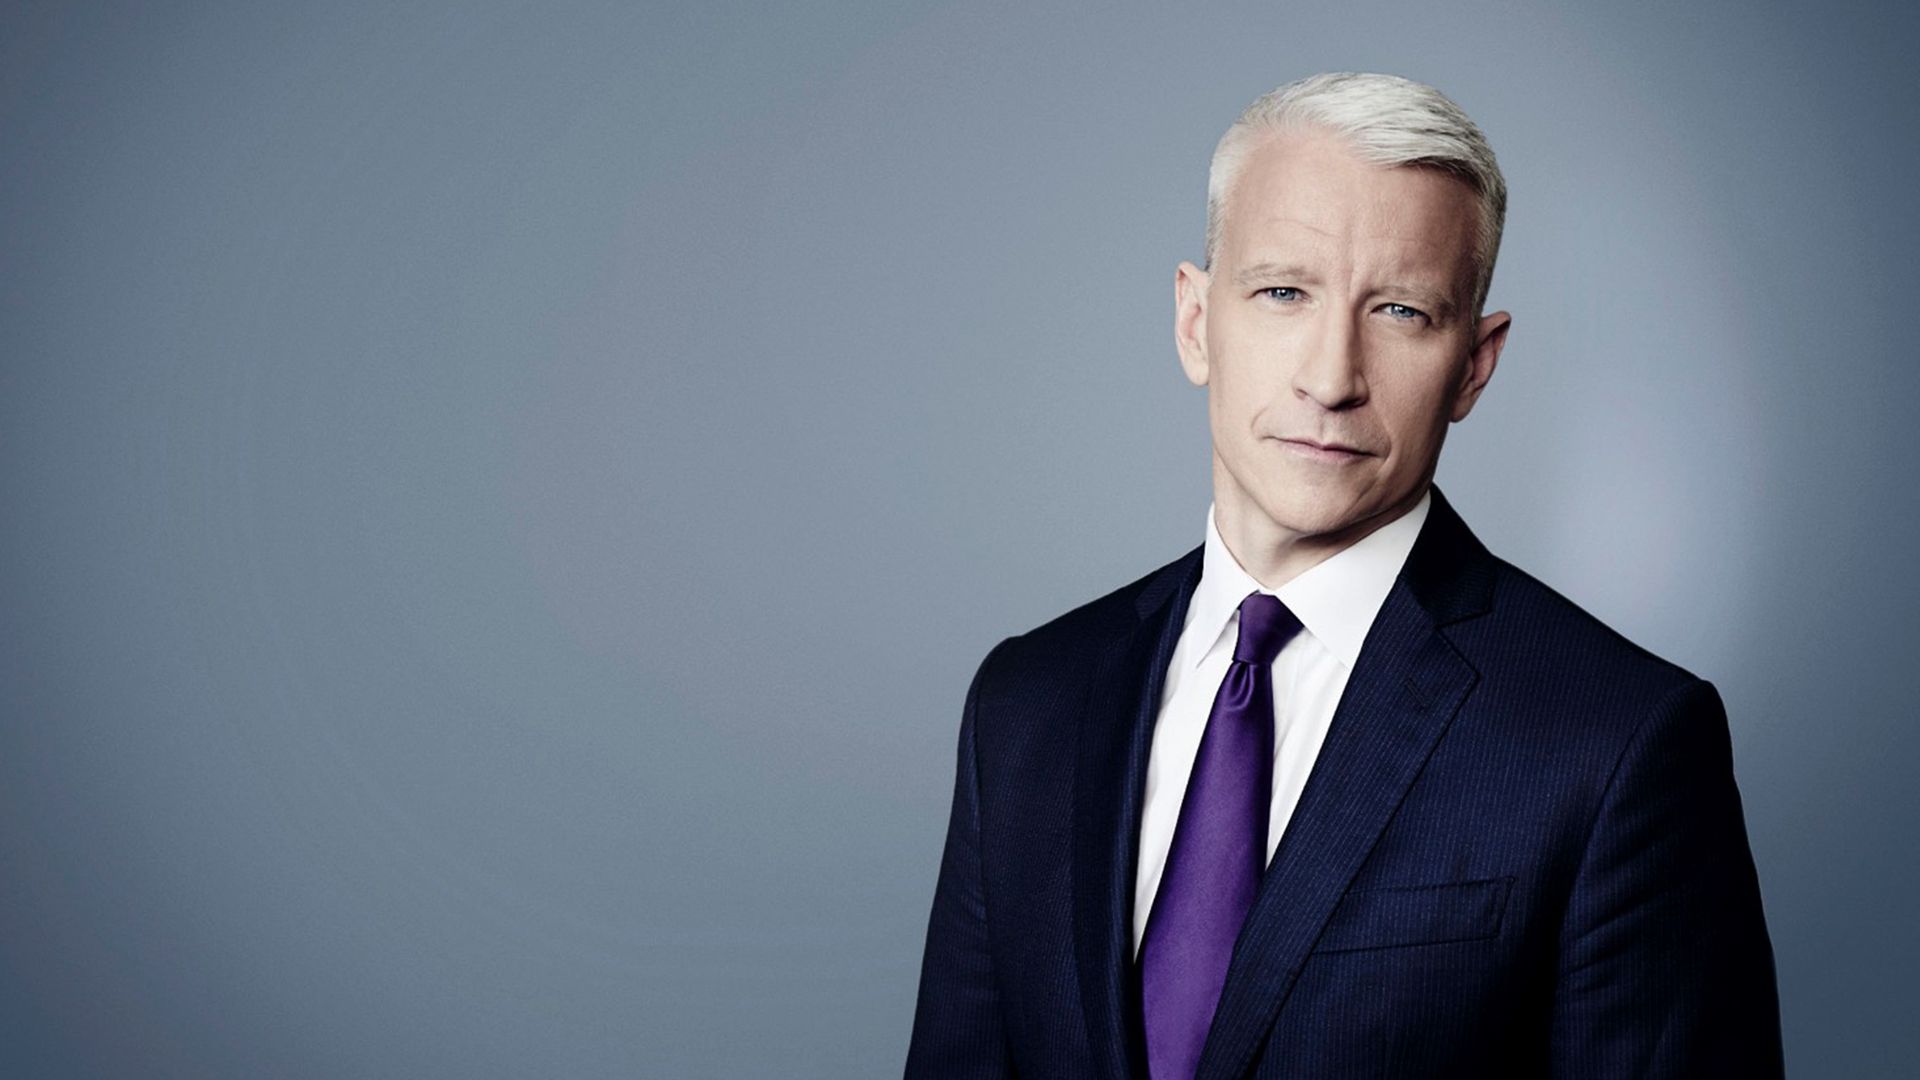 Anderson Cooper 360° background